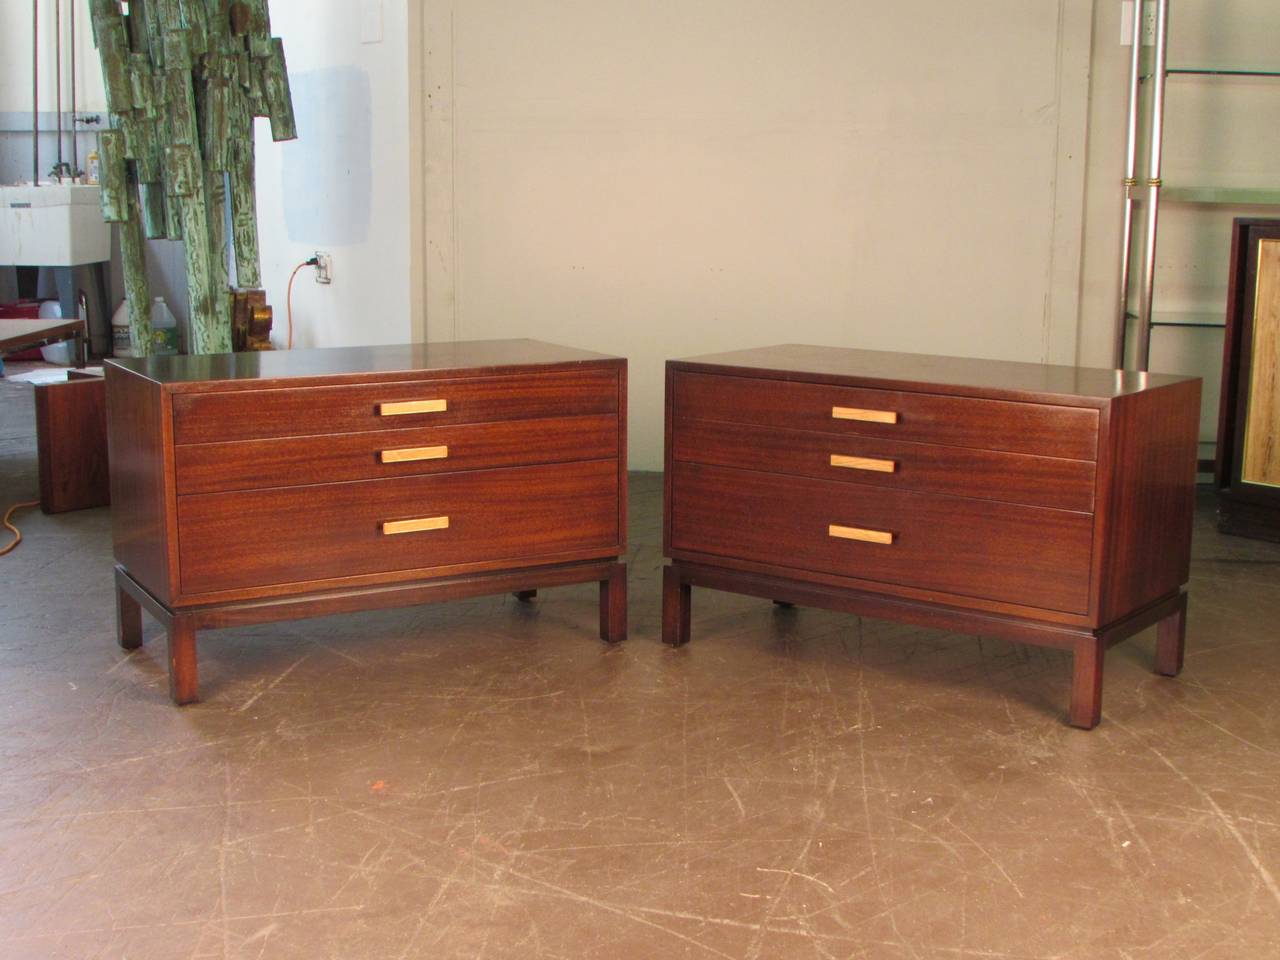 Rare ribbon mahogany end tables or nightstands by Harvey Probber Studio, circa 1965. The handles are brass with a bleached rosewood detail. These chests were custom ordered by and built for the original owner. Used as large bed-side tables or